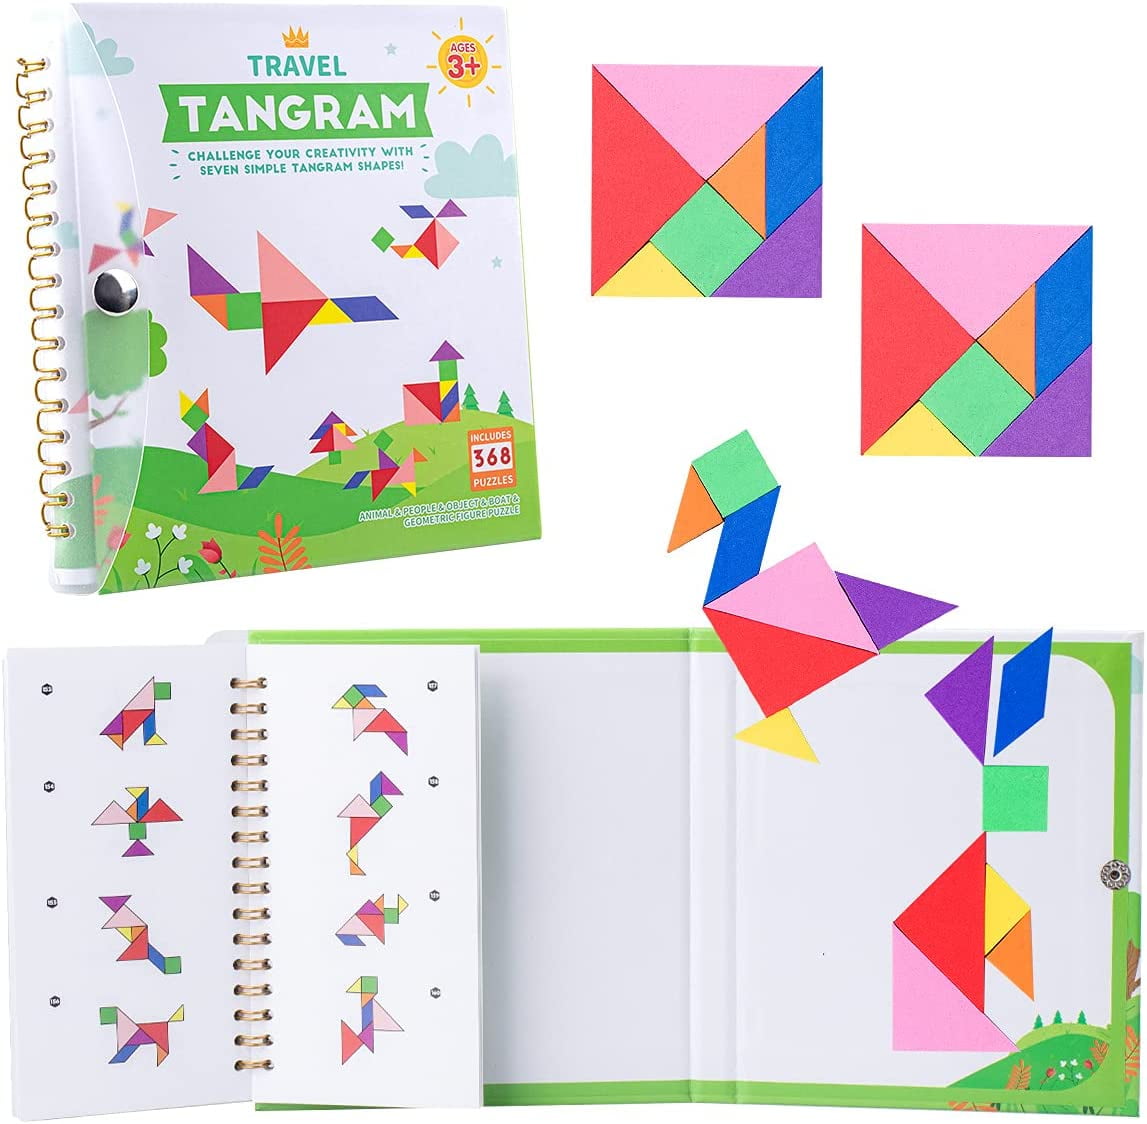 USATDD Tangram Game 360 Magnetic Puzzle Travel Games Jigsaw with Solution Questions Kid Adult Challenge IQ Book Colorful Shapes Educational Toy for 3-100 Years Old 【2 Set of Tangrams 360 Patterns】 